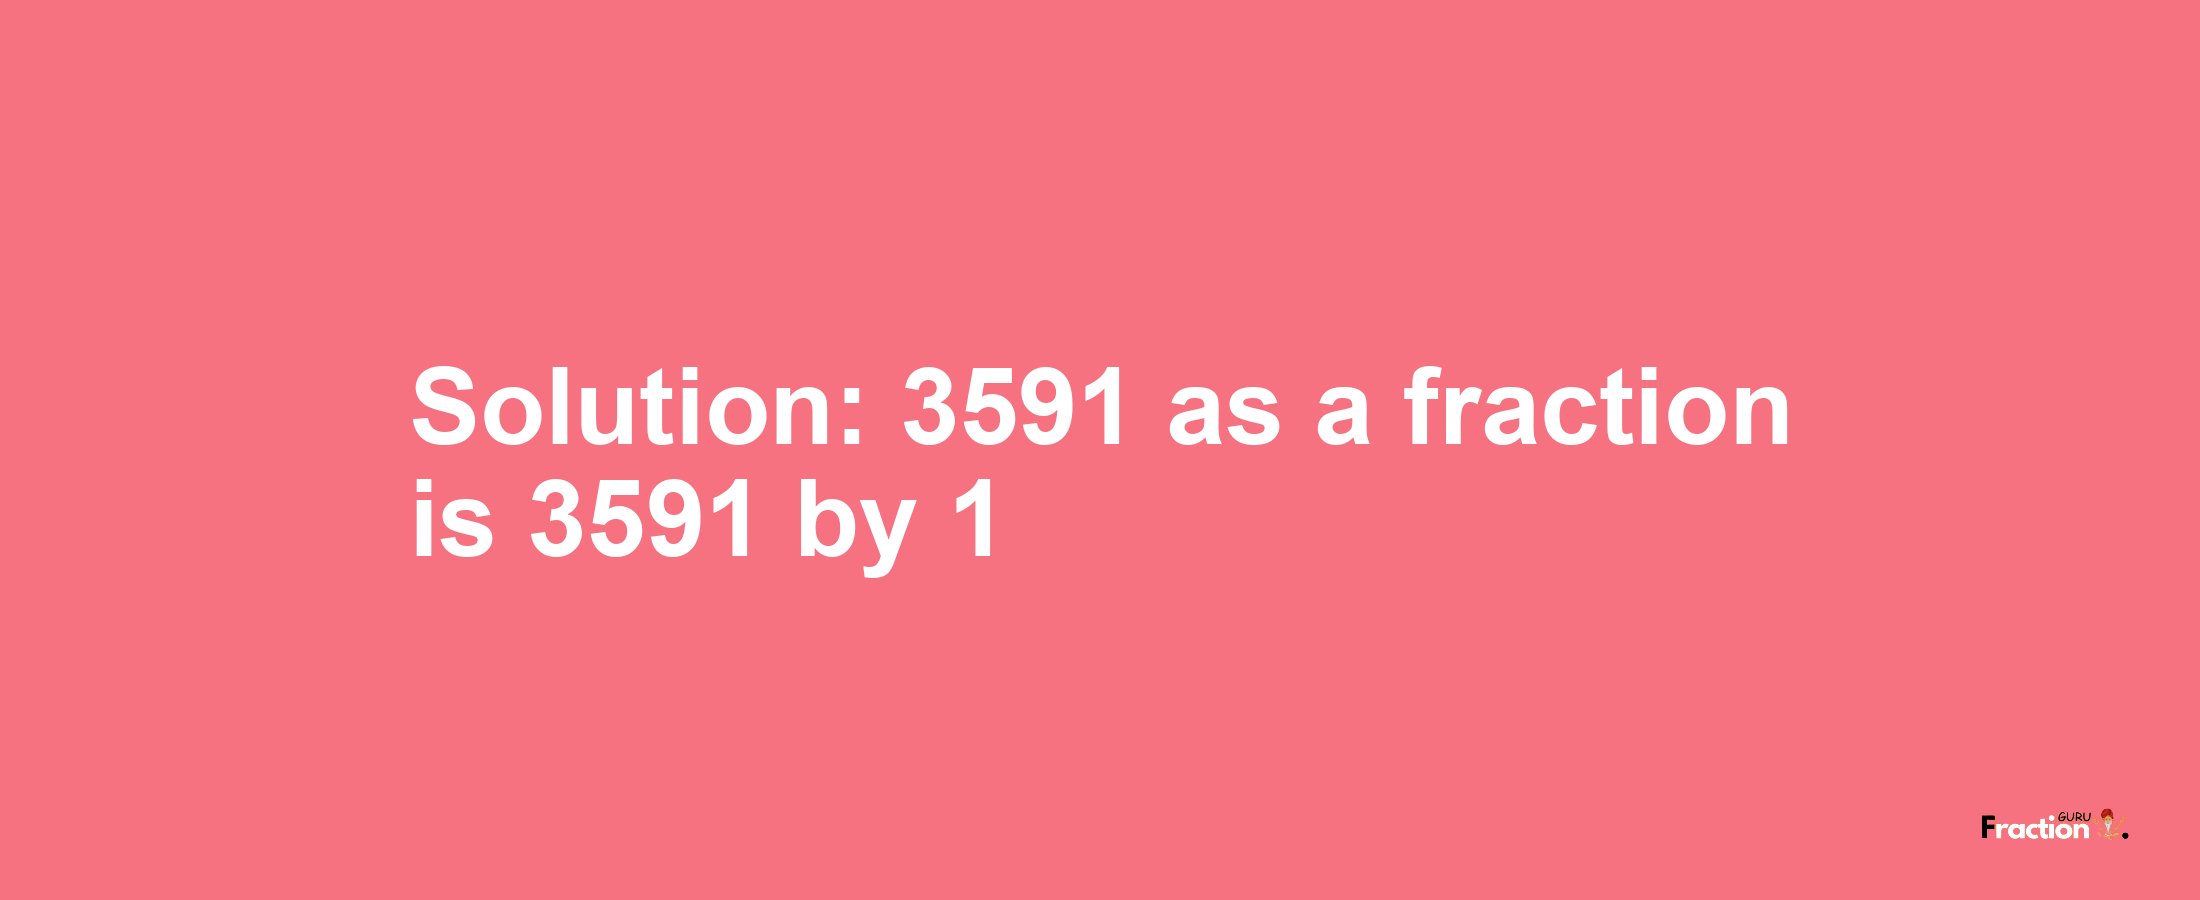 Solution:3591 as a fraction is 3591/1